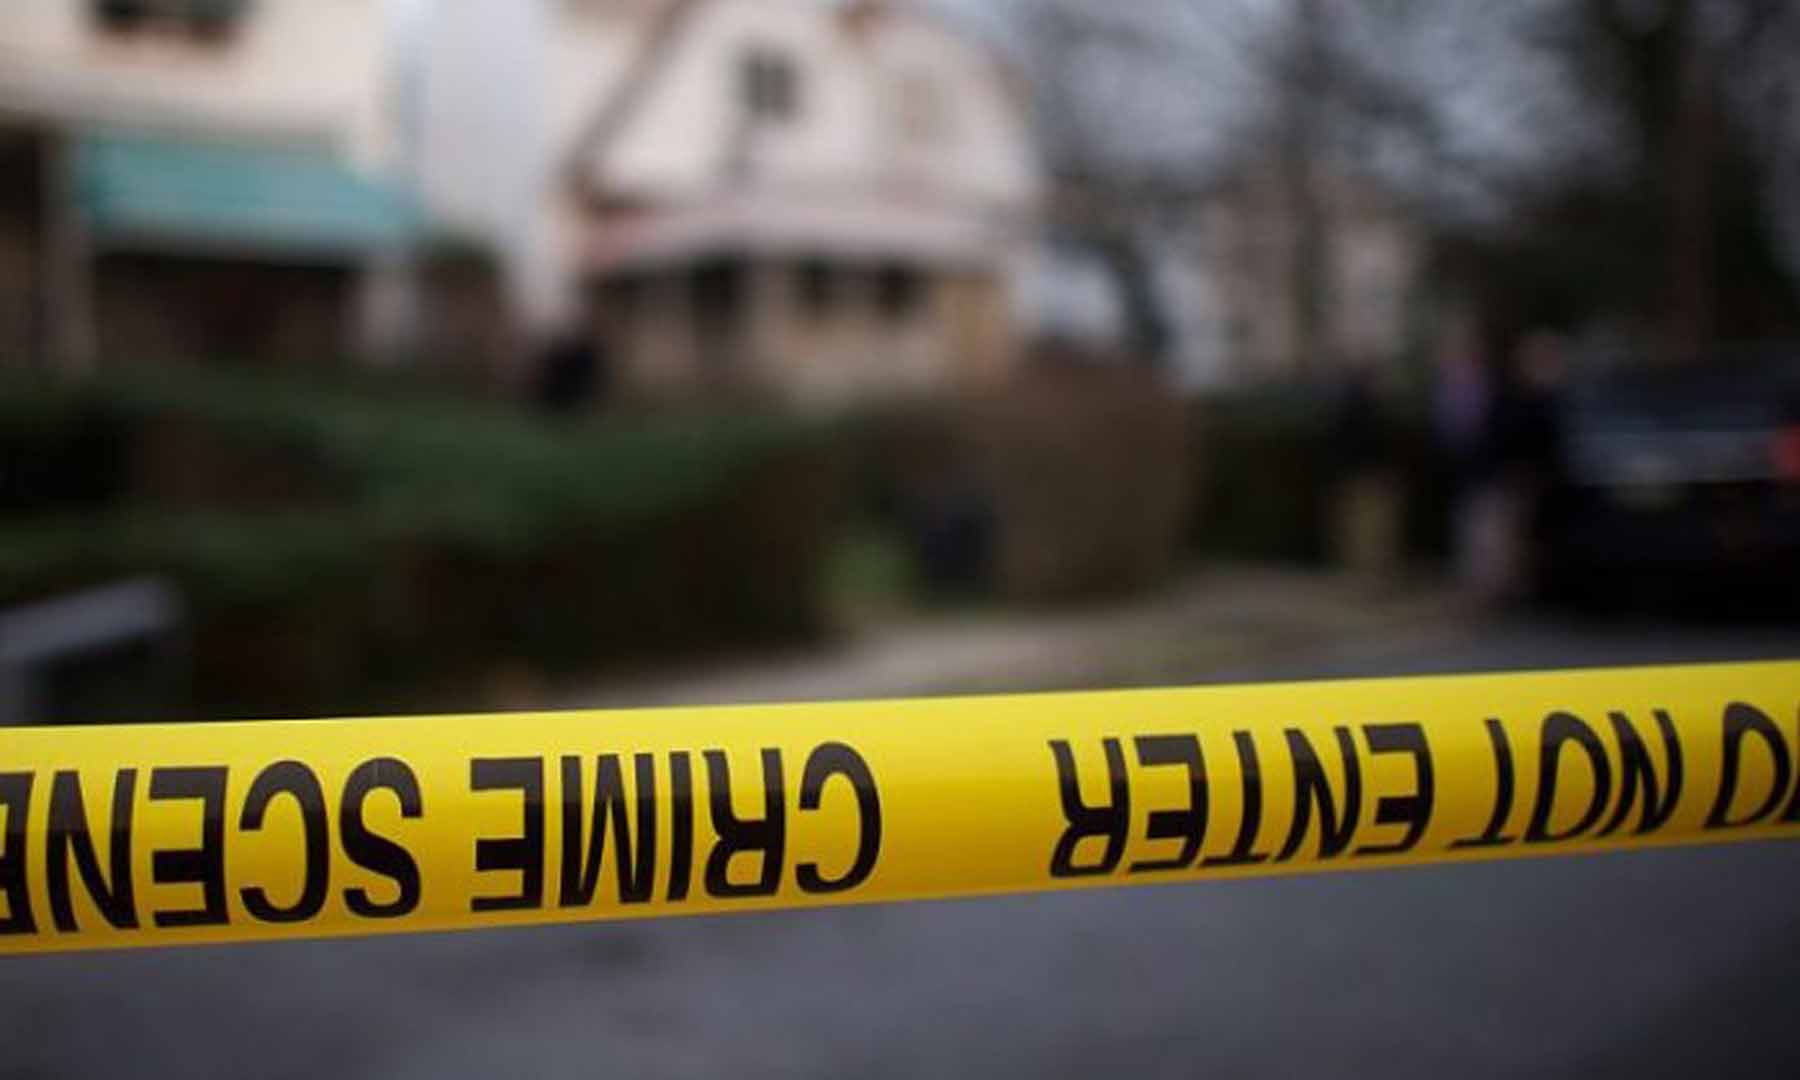 Family of 4 Found Dead in Northeast Oklahoma Home